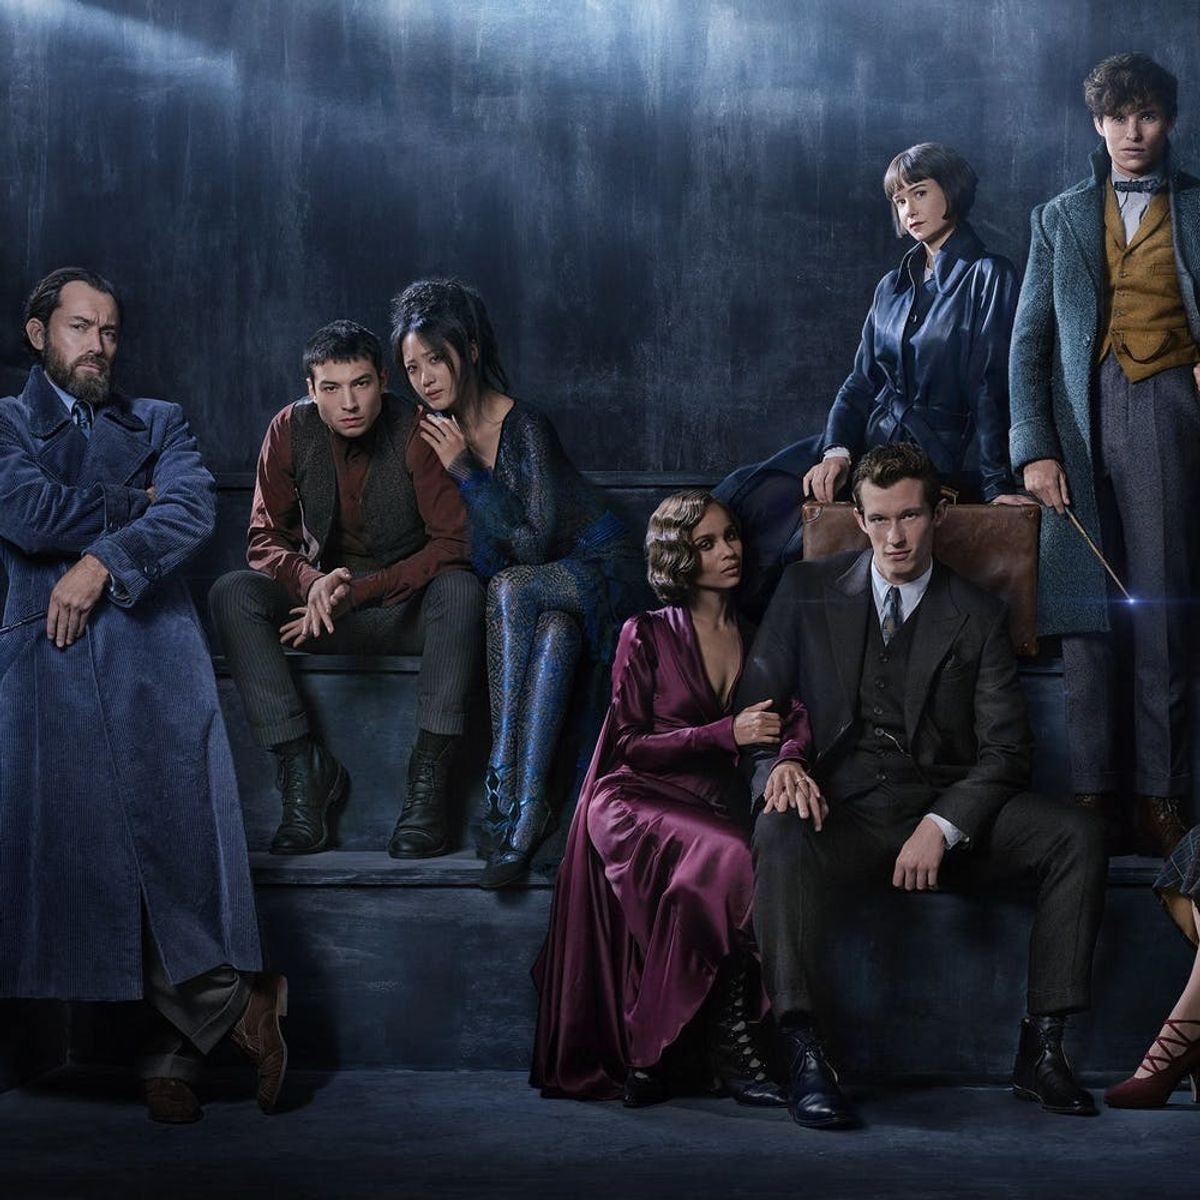 The First ‘Fantastic Beasts: The Crimes of Grindelwald’ Trailer Is Full of Action-Packed Magic